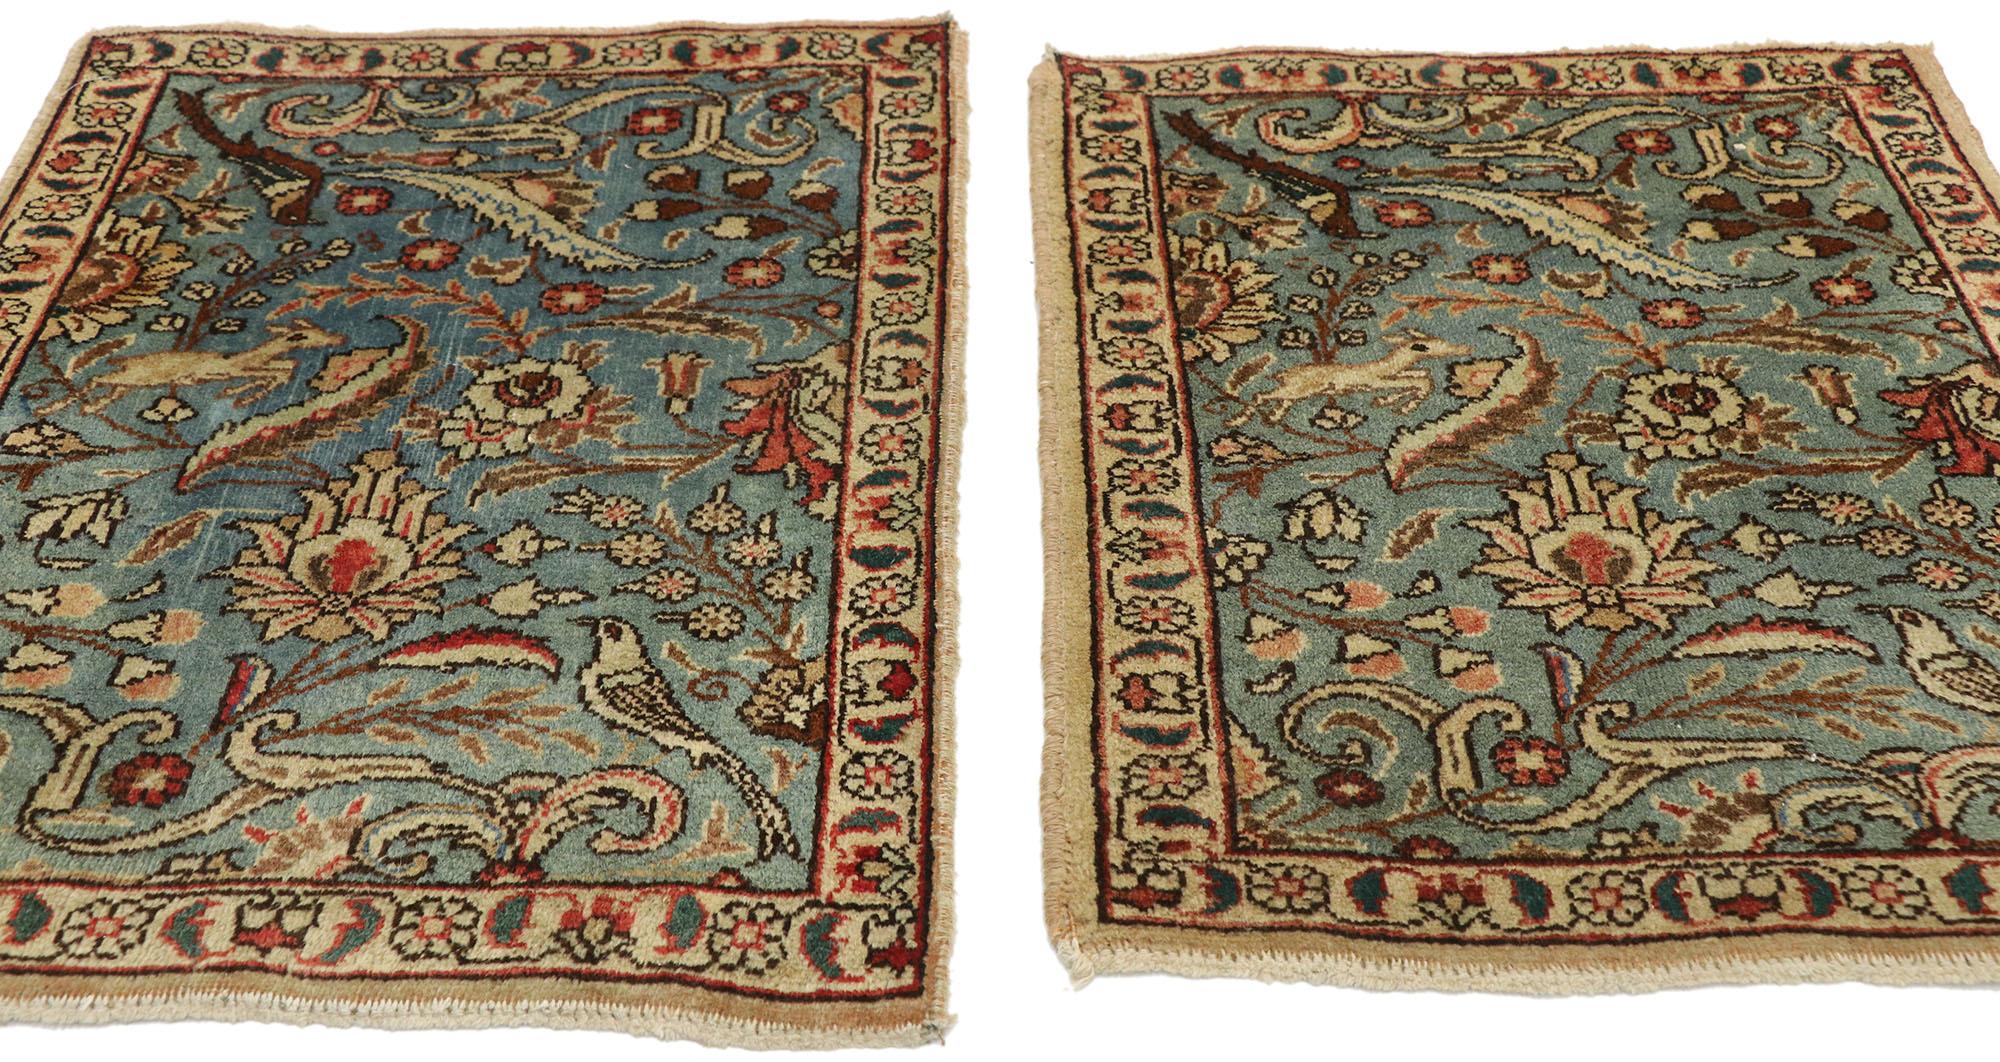 77429-77430 pair of matching vintage Persian Tabriz accent rugs. Regal and refined with a timeless design, this pair of matching vintage Persian Tabriz rugs are poised to impress. The abrashed cerulean field is covered in an all-over botanical